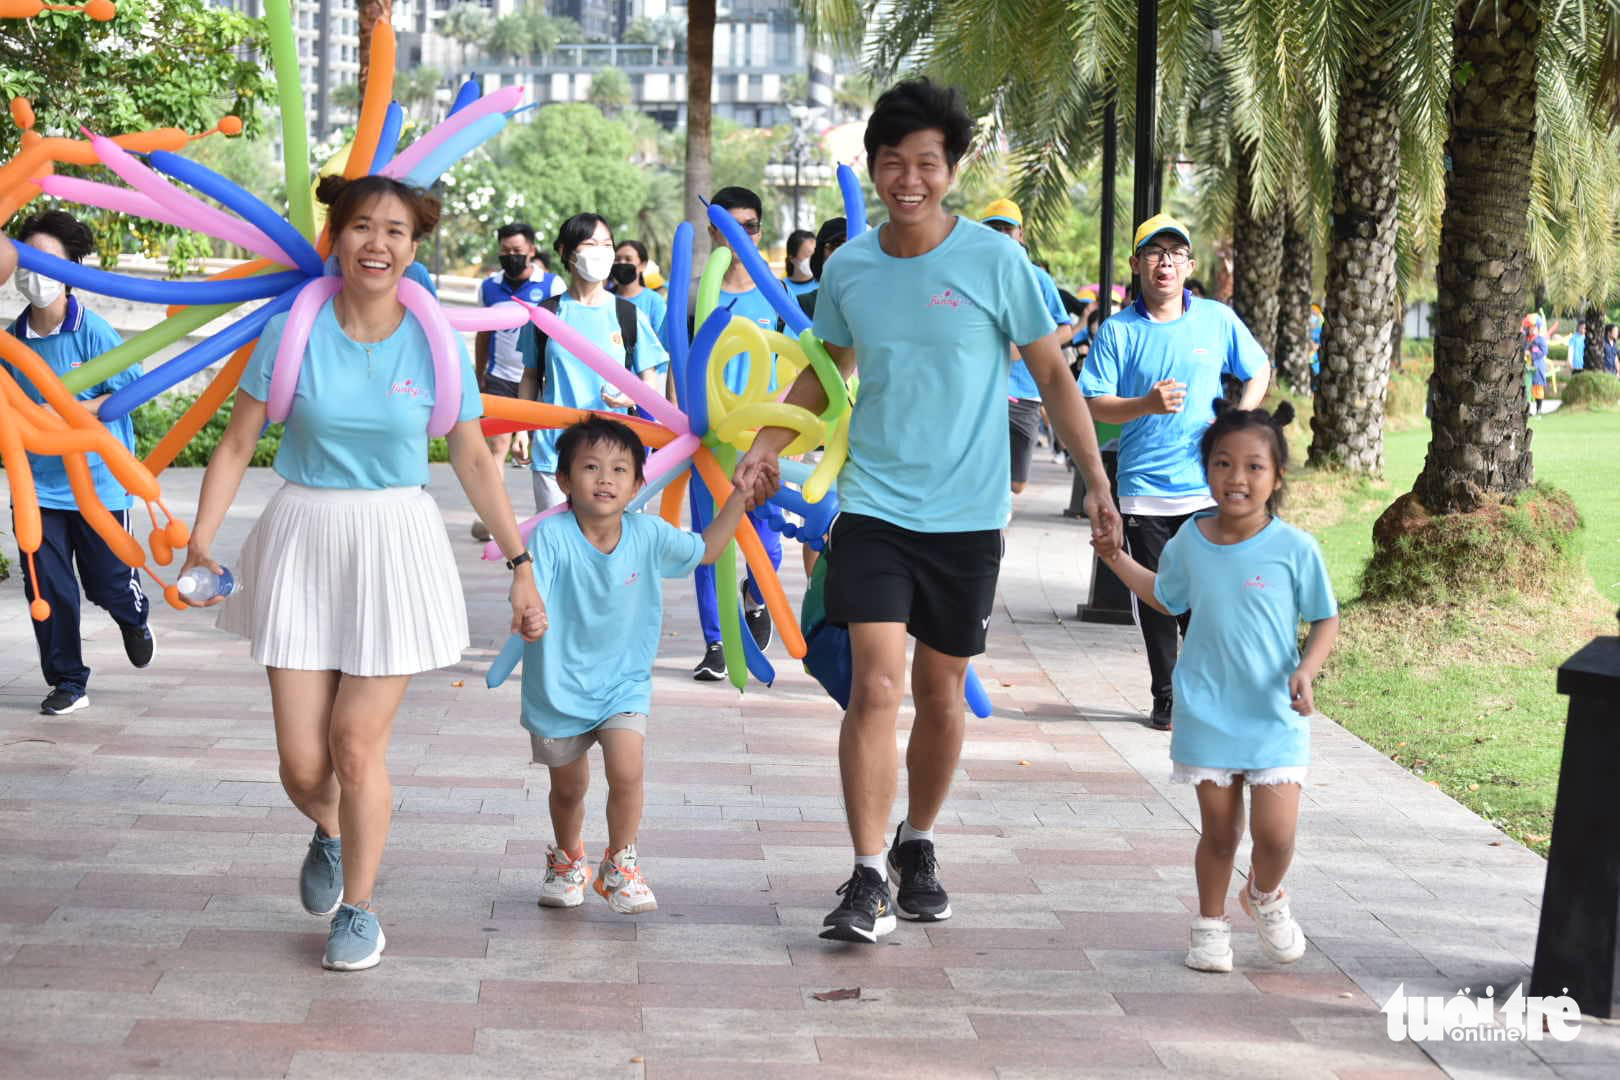 A family takes part in the Sunflower Marathon in Binh Thanh District, Ho Chi Minh City, May 22, 2022. Photo: Ngoc Phuong / Tuoi Tre